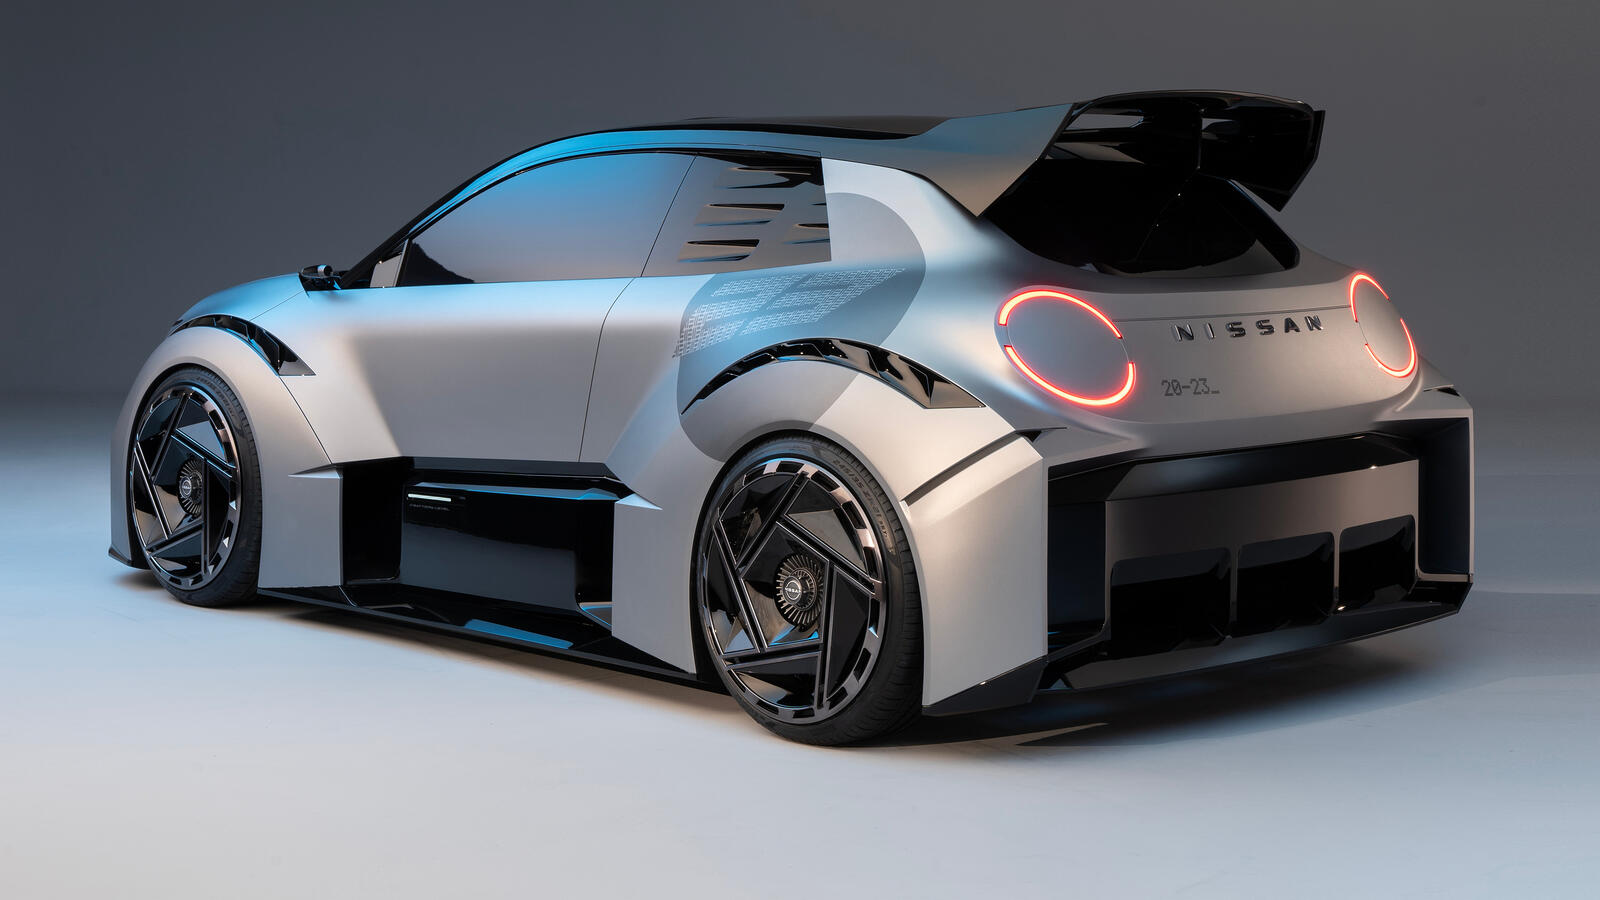 Free photo Nissan Concept 20-23 / Welcome to the future!